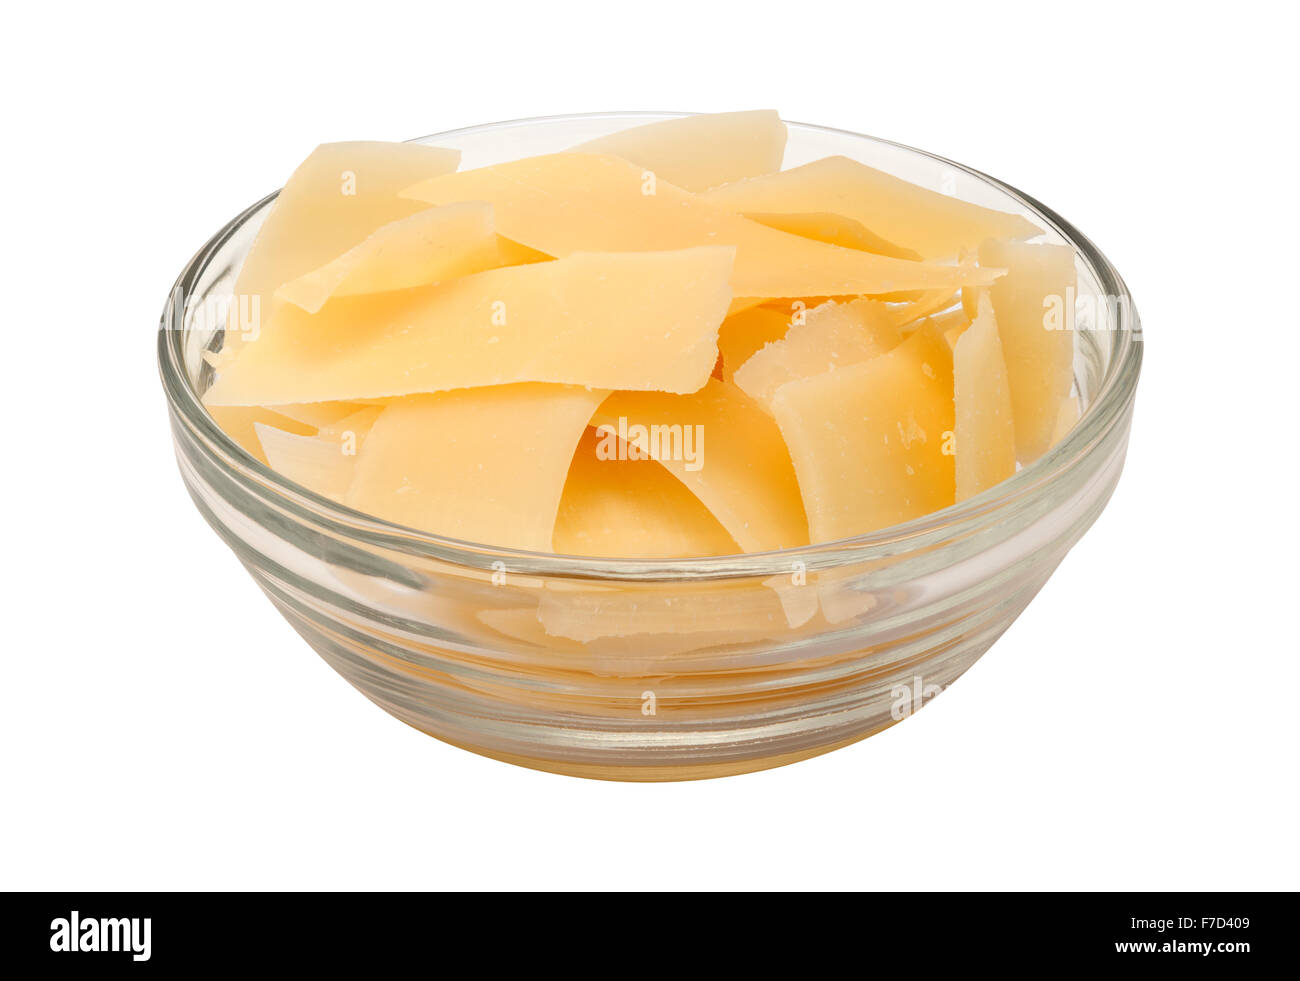 Shaved Parmesan Cheese in a glass bowl. The image is a cut out, isolated on a white background, Stock Photo